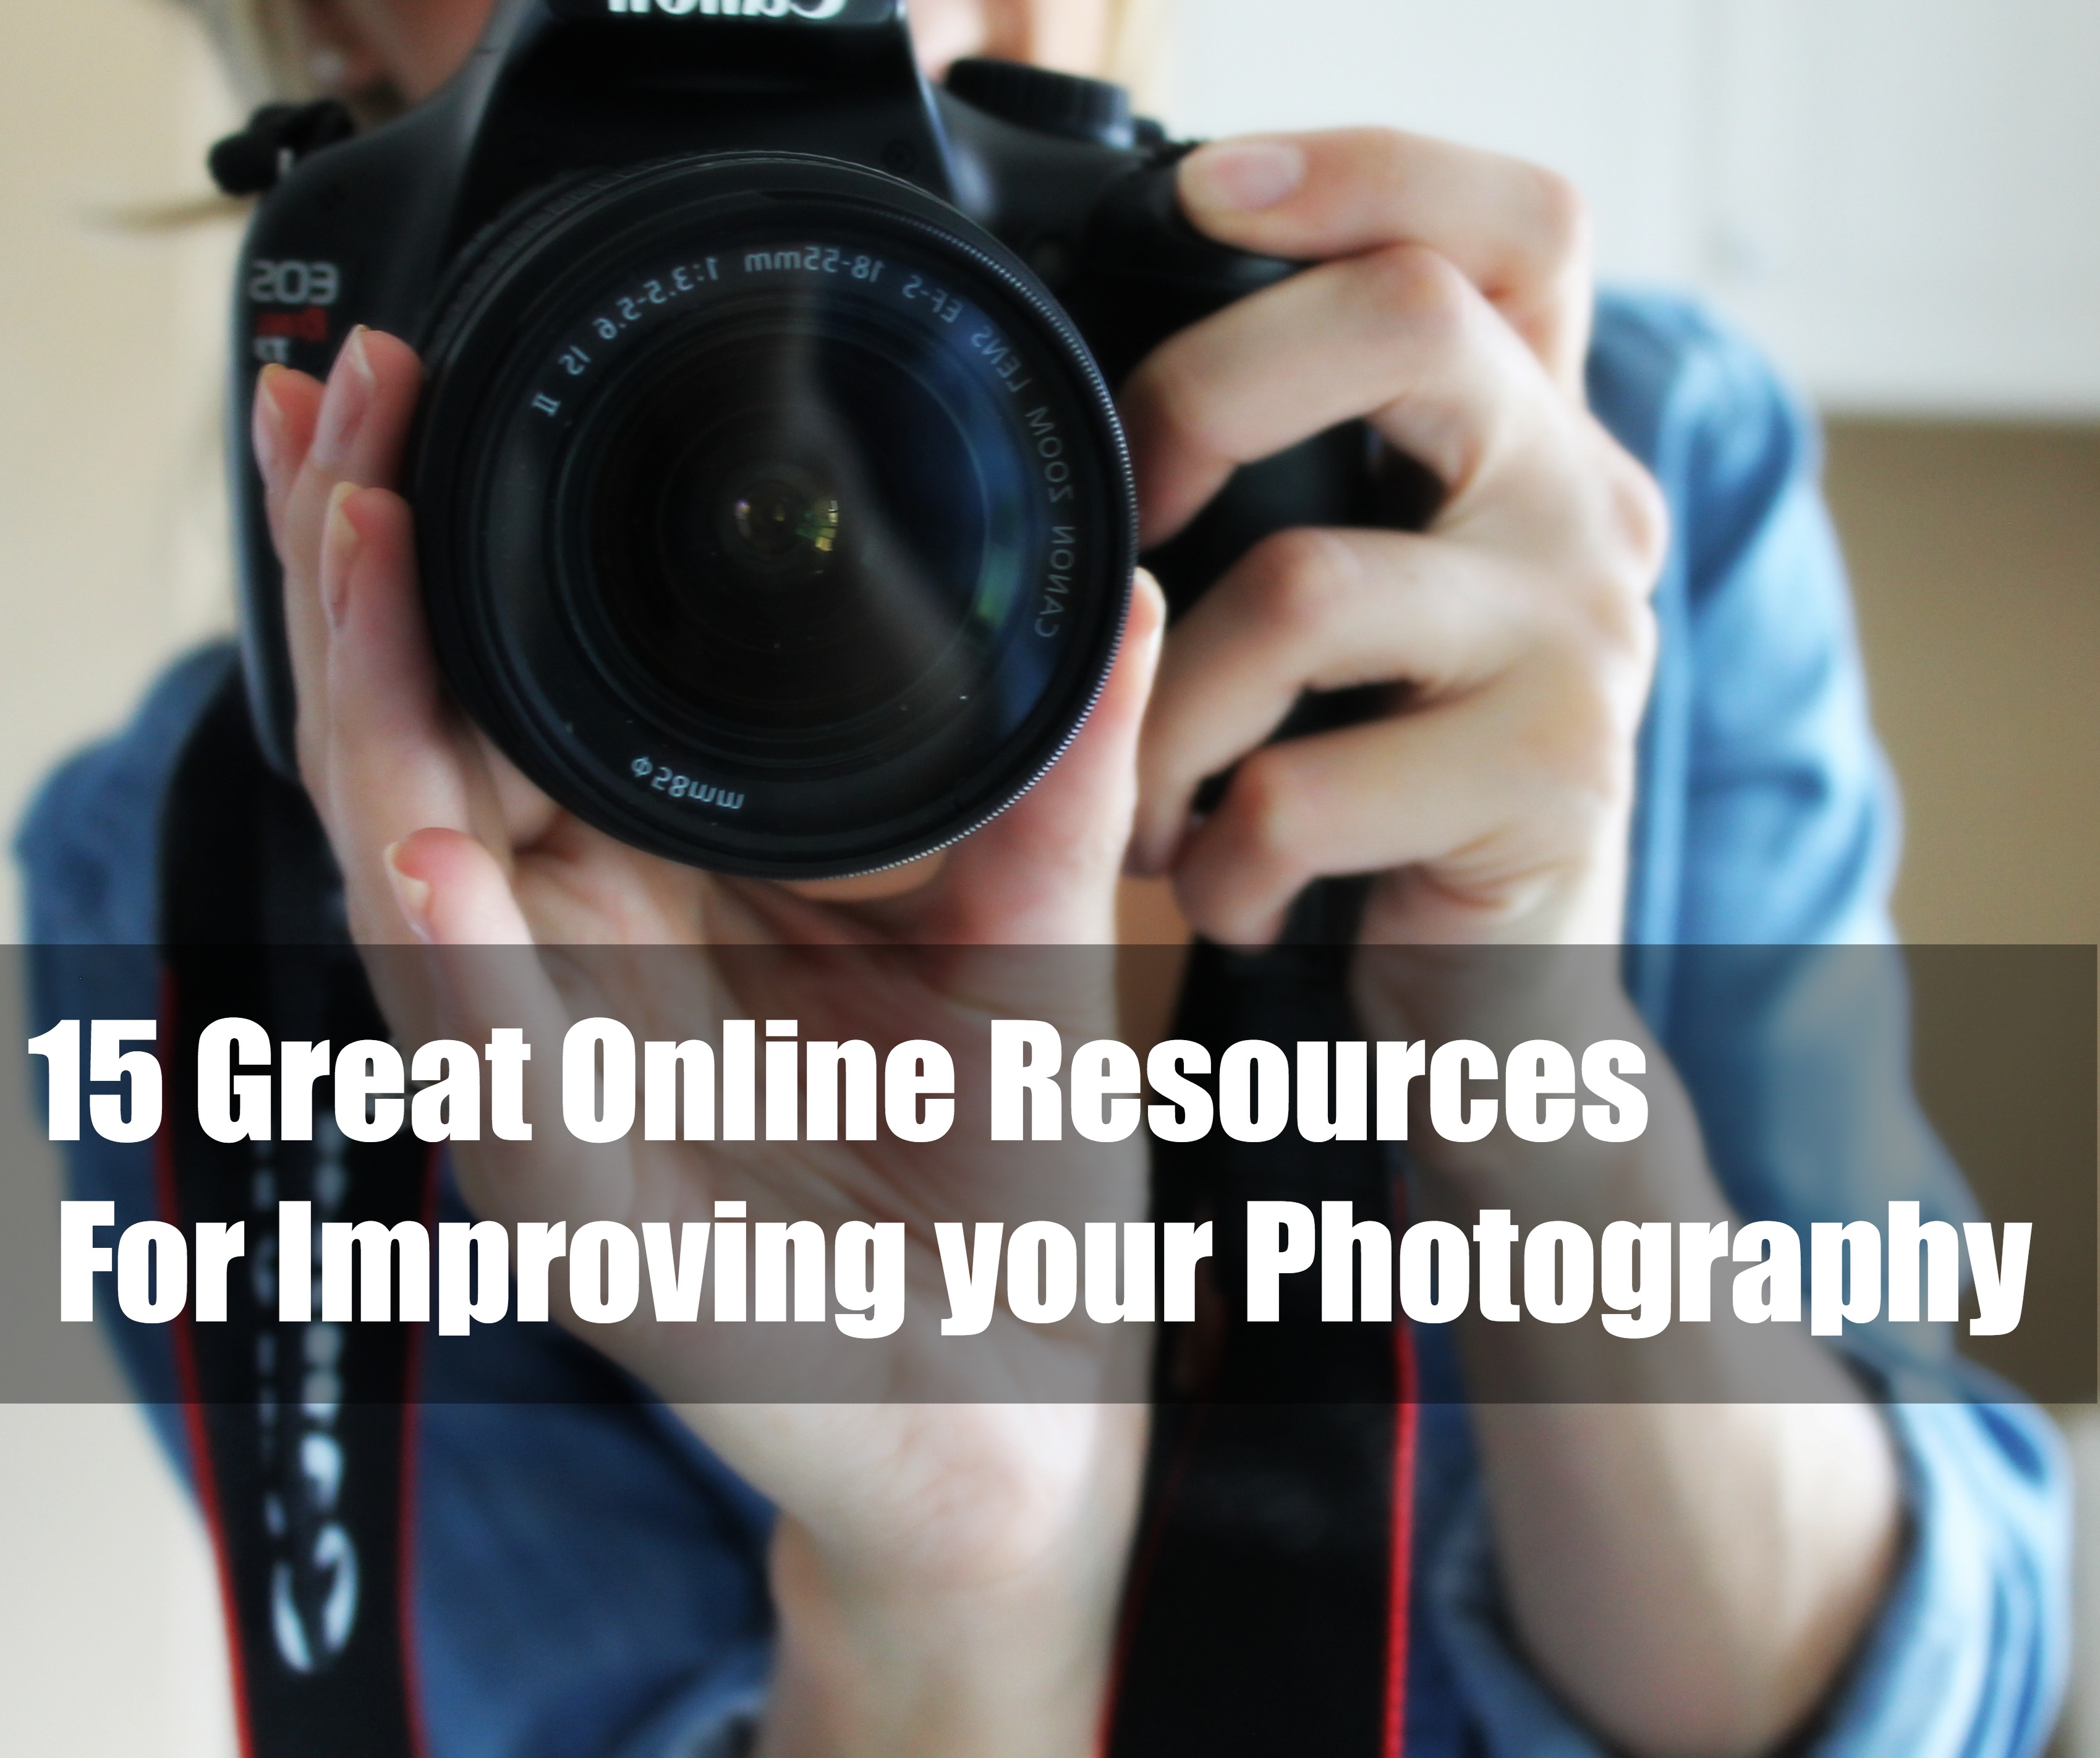 15 great online resources for improving your photography via Market Street Petite